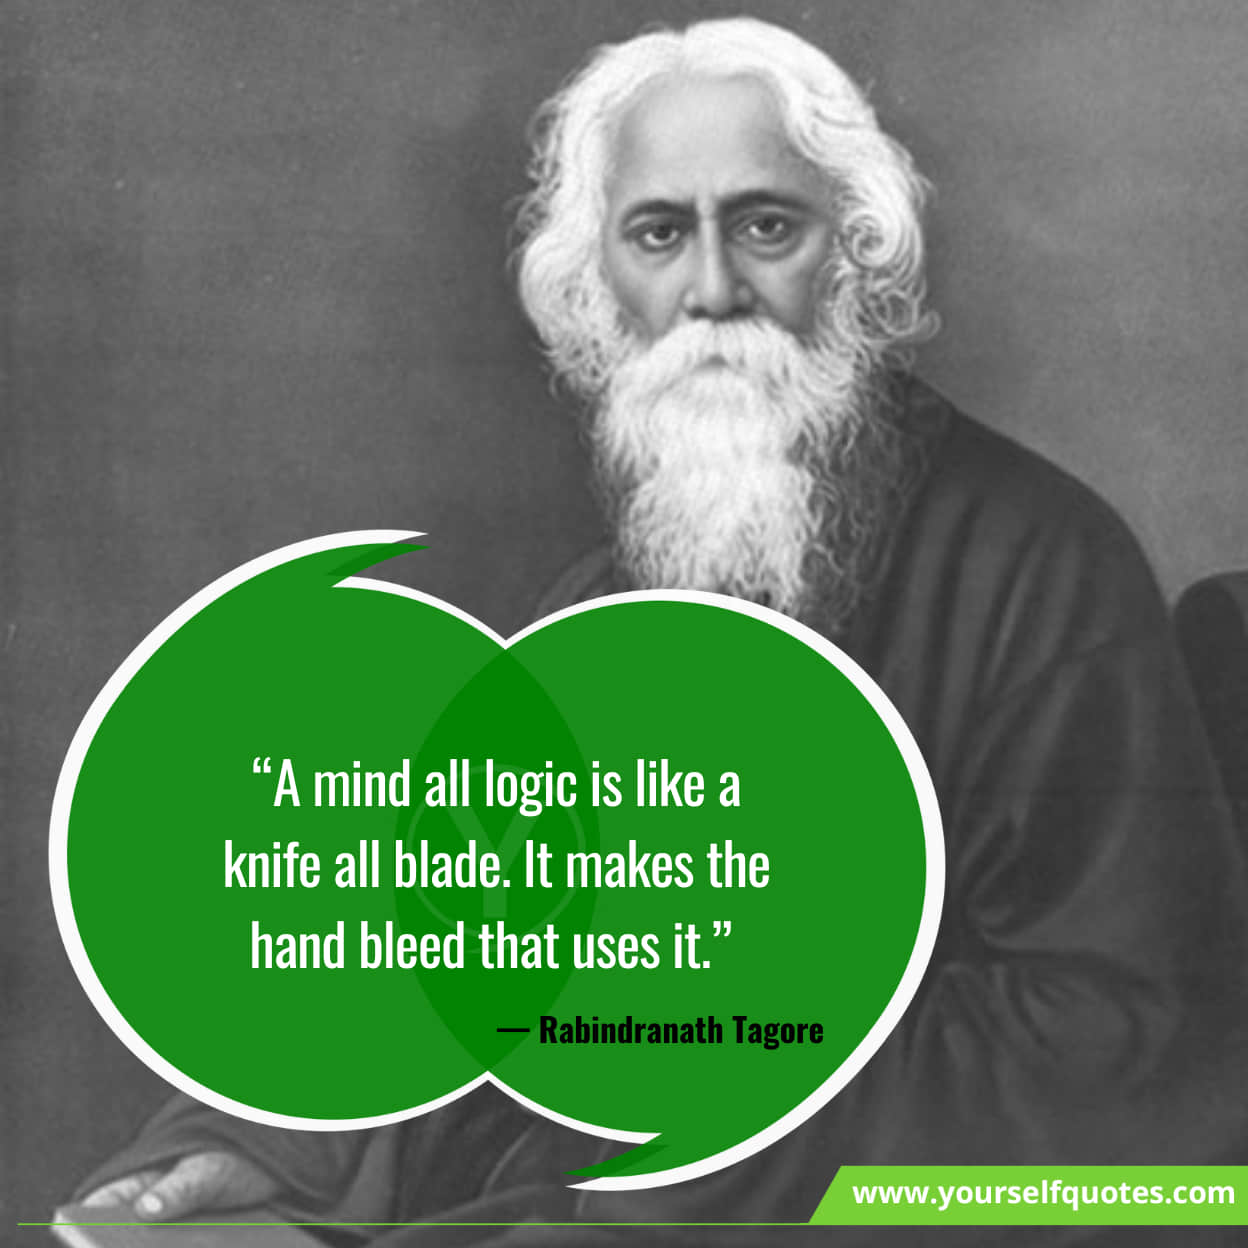 Rabindranath Tagore quotes on education and learning